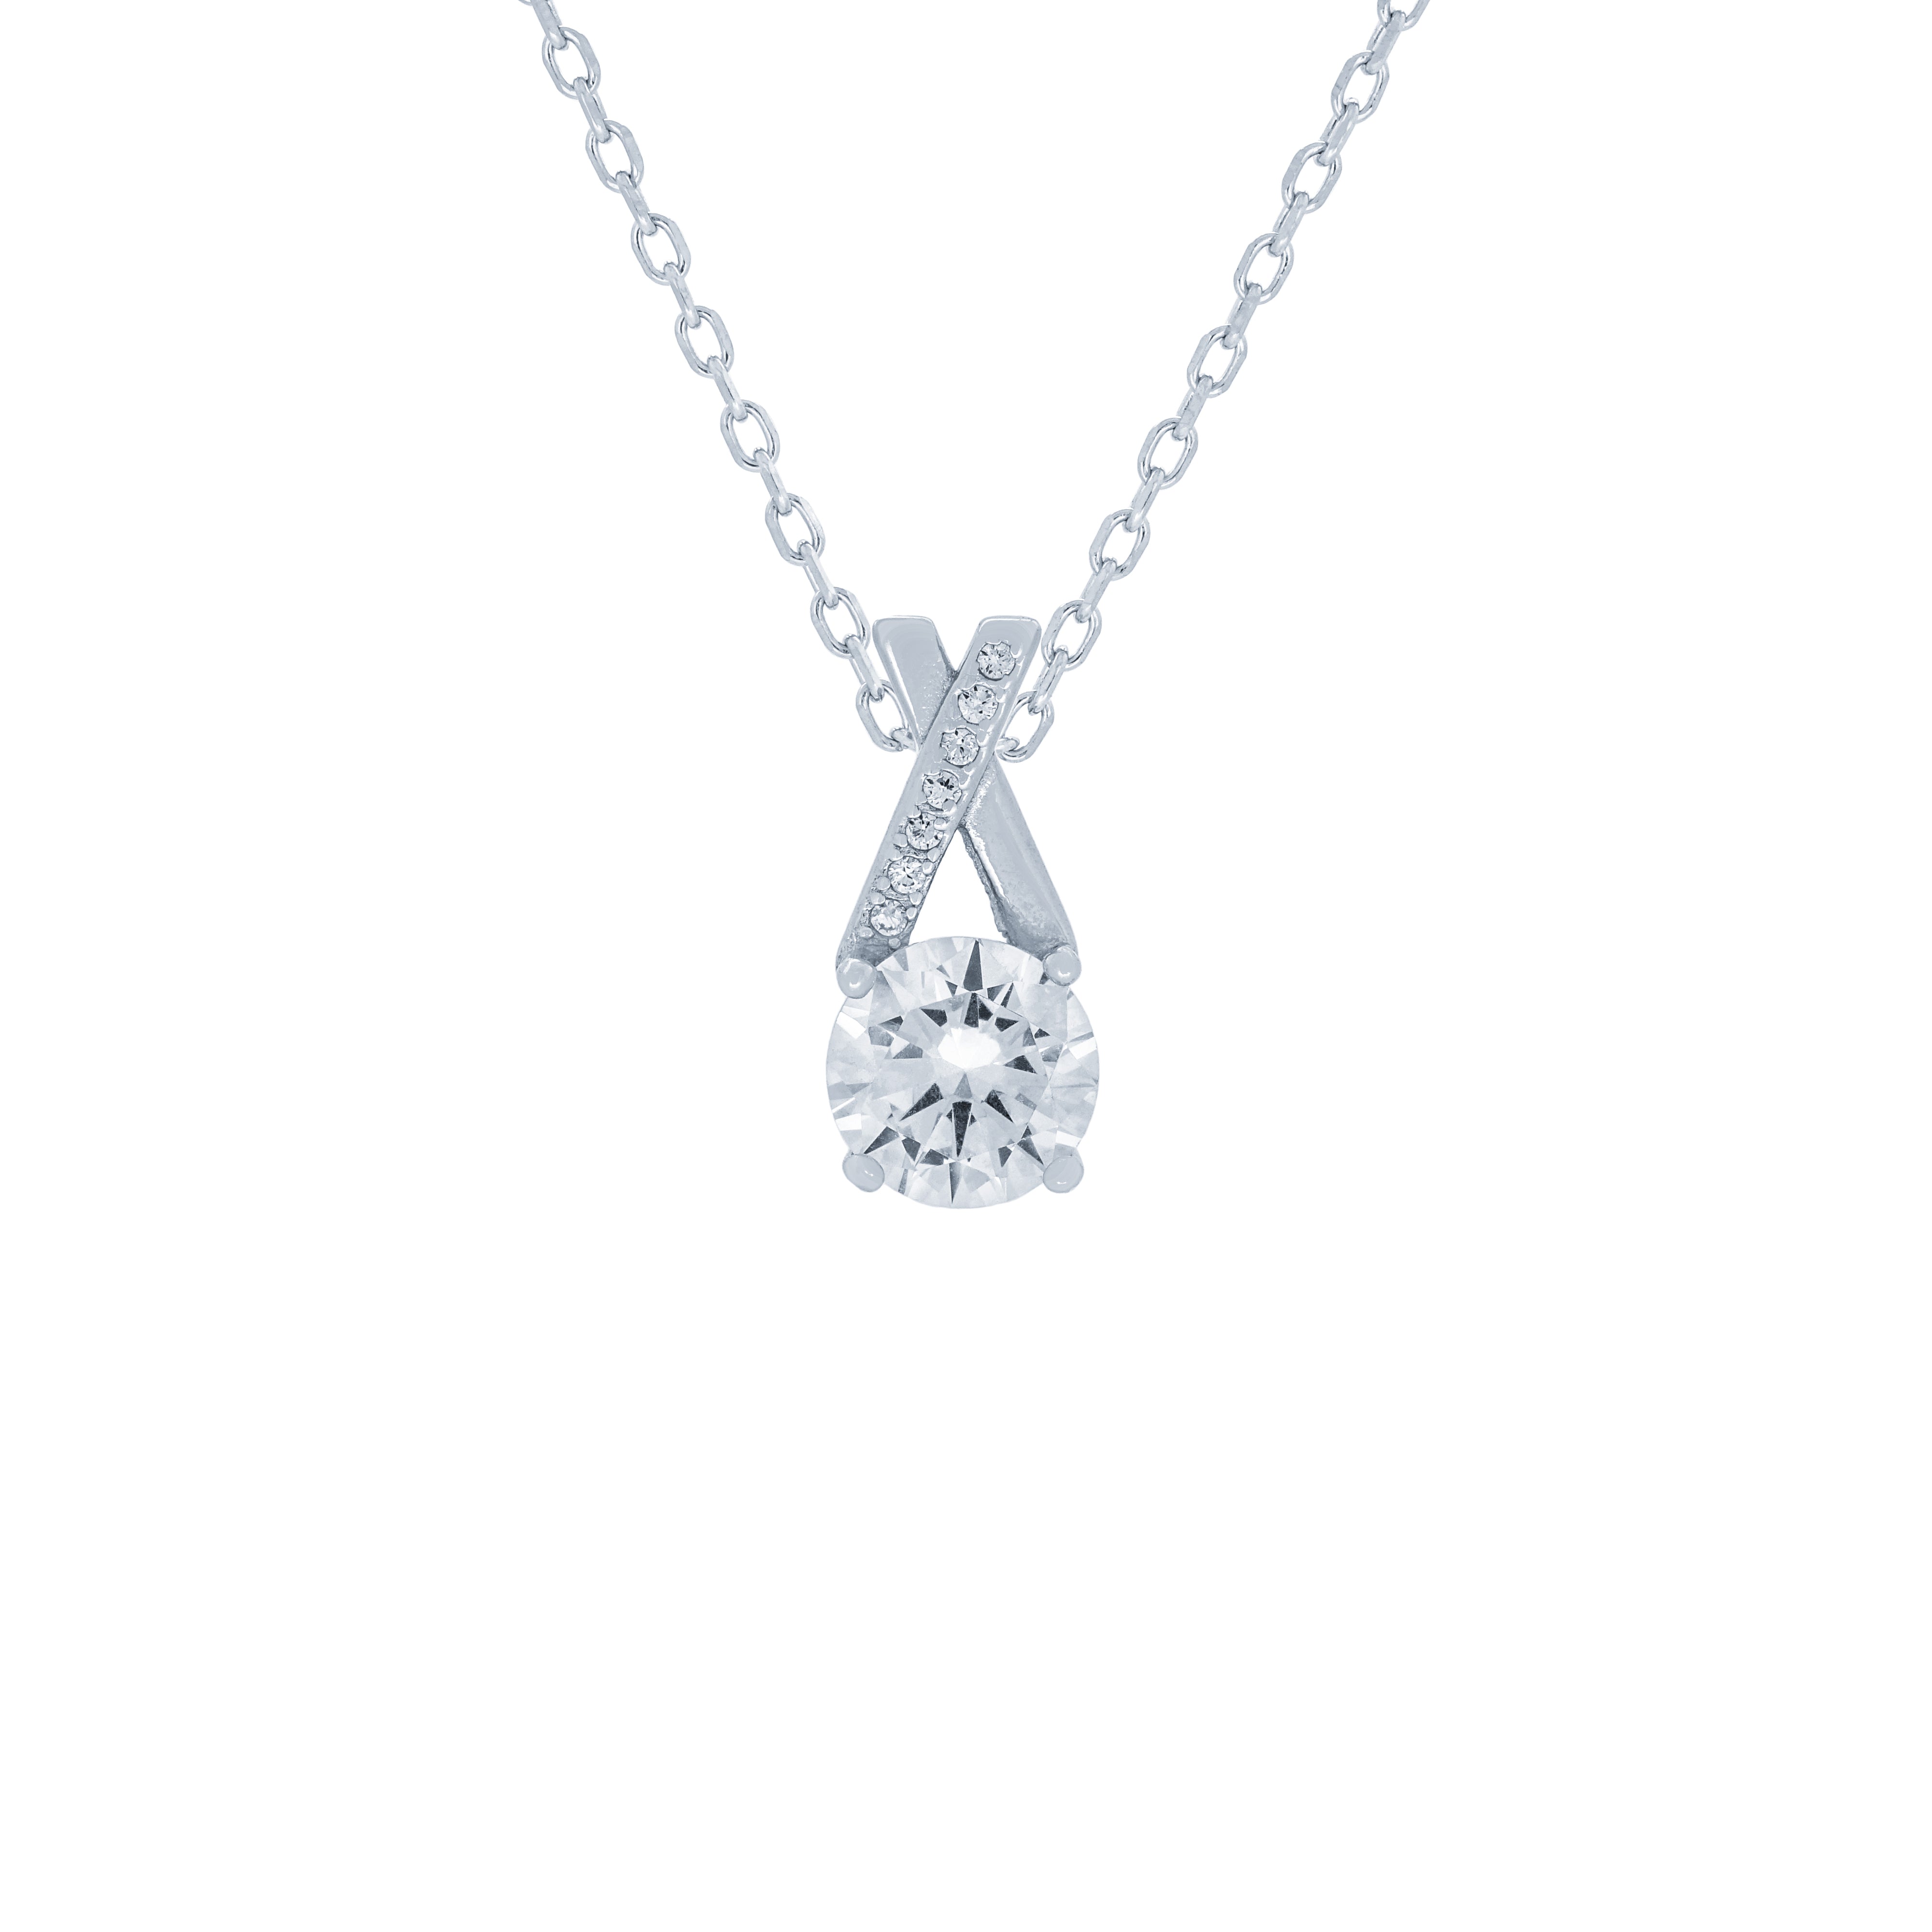 (100165) White Cubic Zirconia Pendant Necklace In Sterling Silver